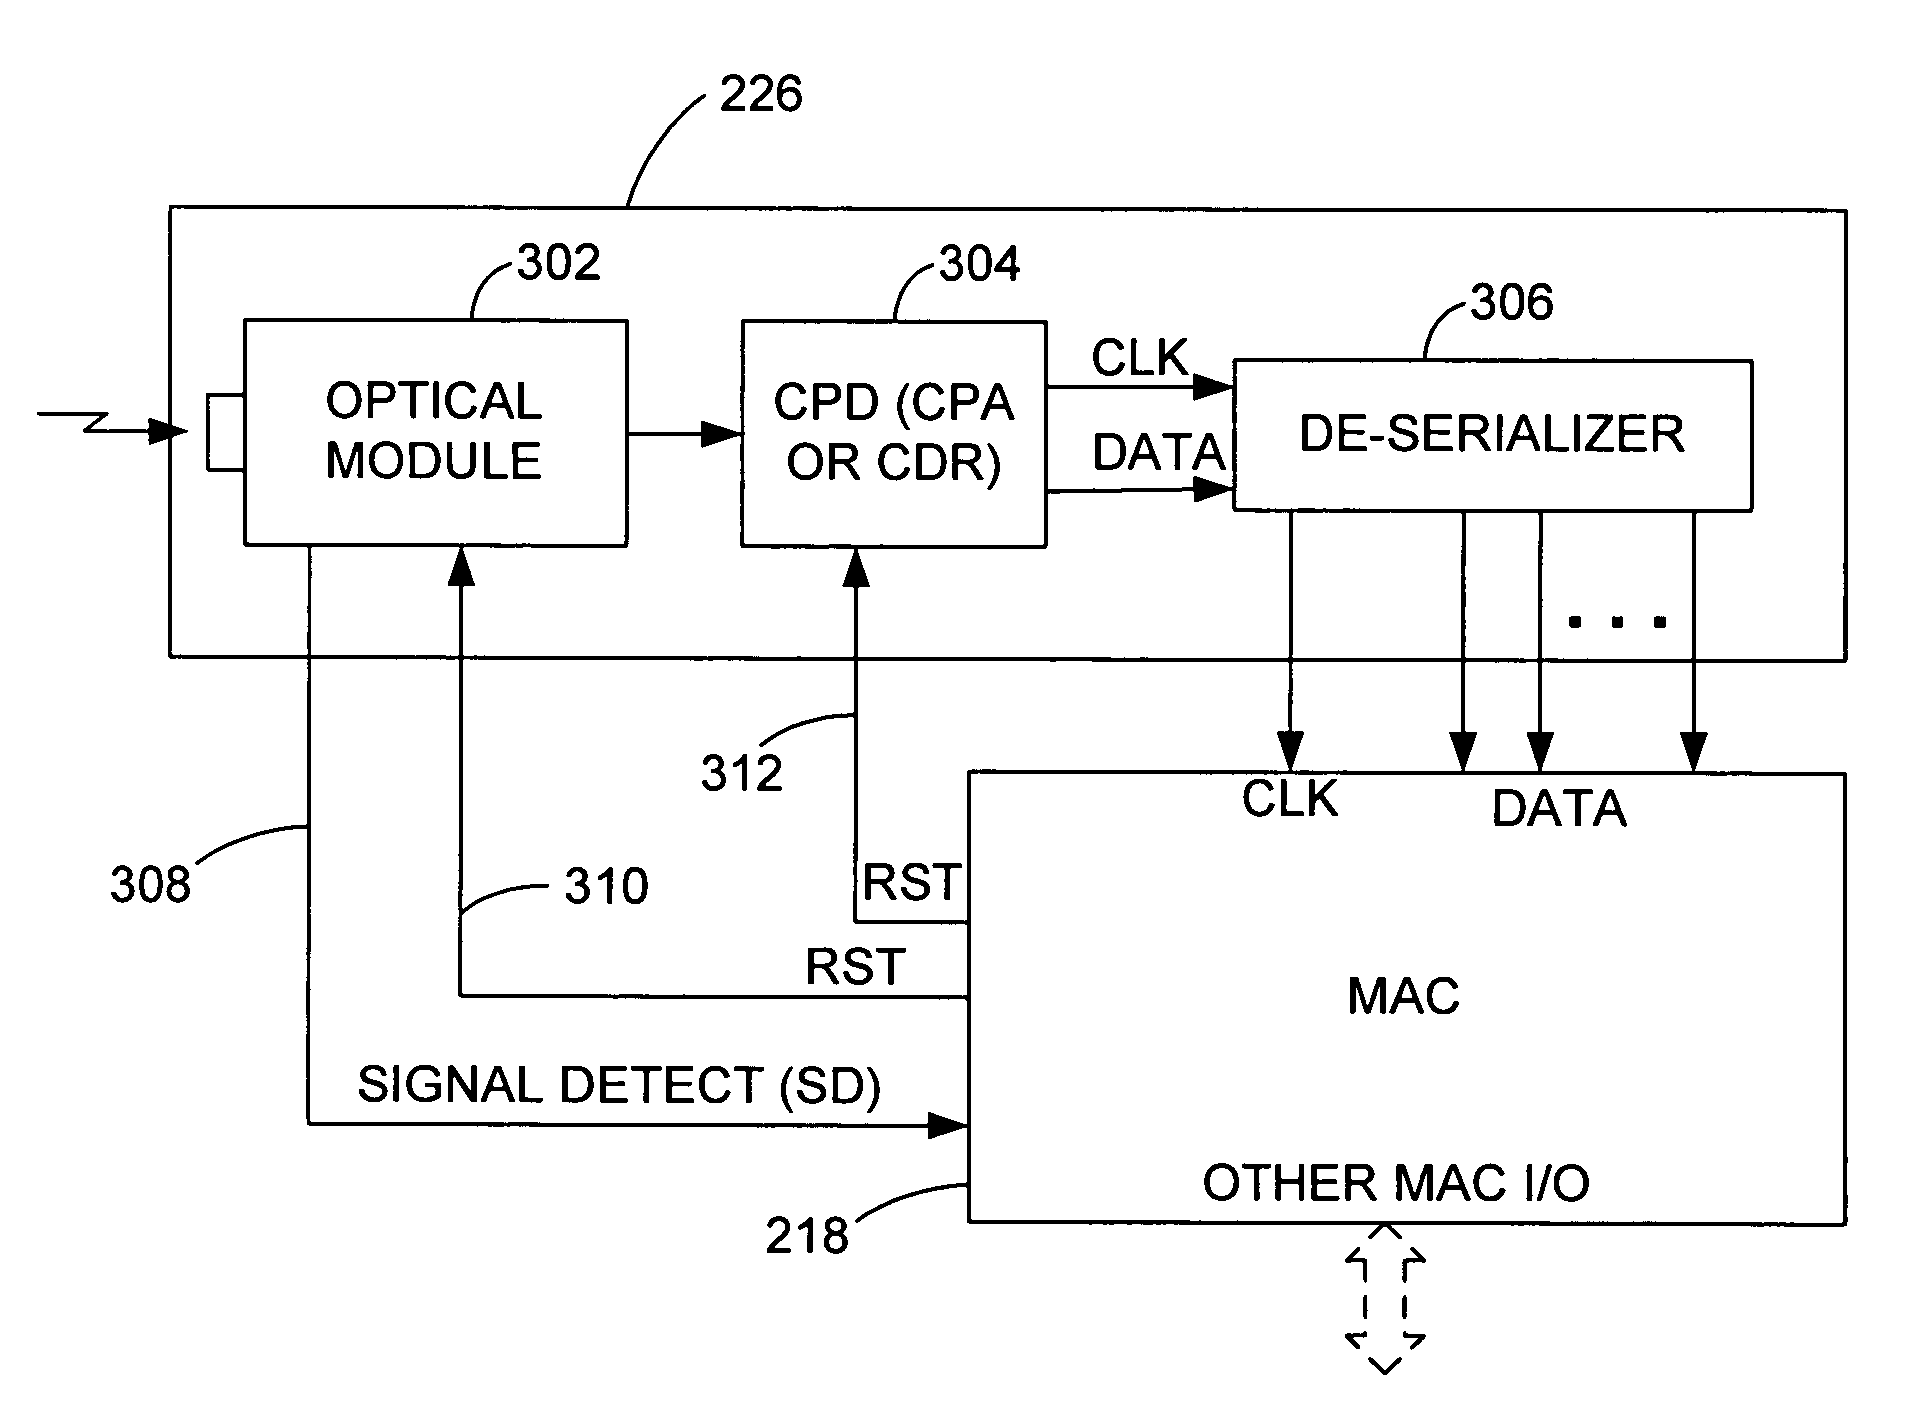 Signal-detect-based ranging technique for burst-mode optical systems